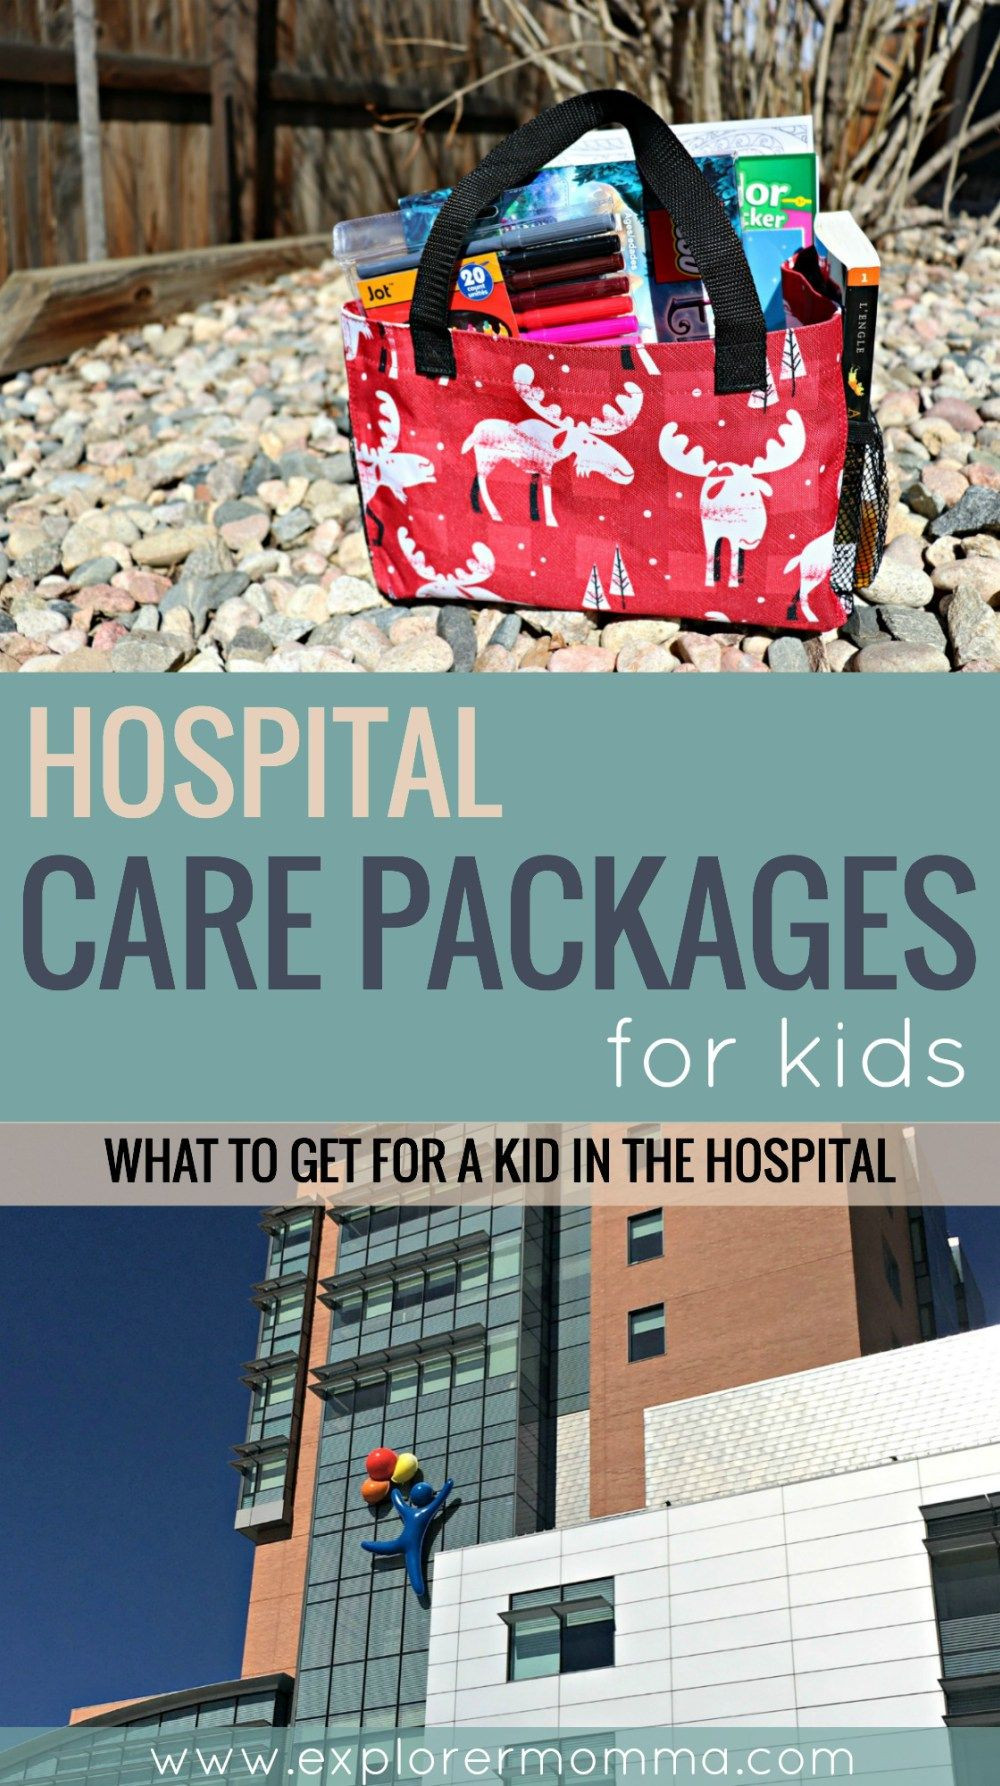 Gift Ideas For Kids In Hospital
 Hospital care packages for kids